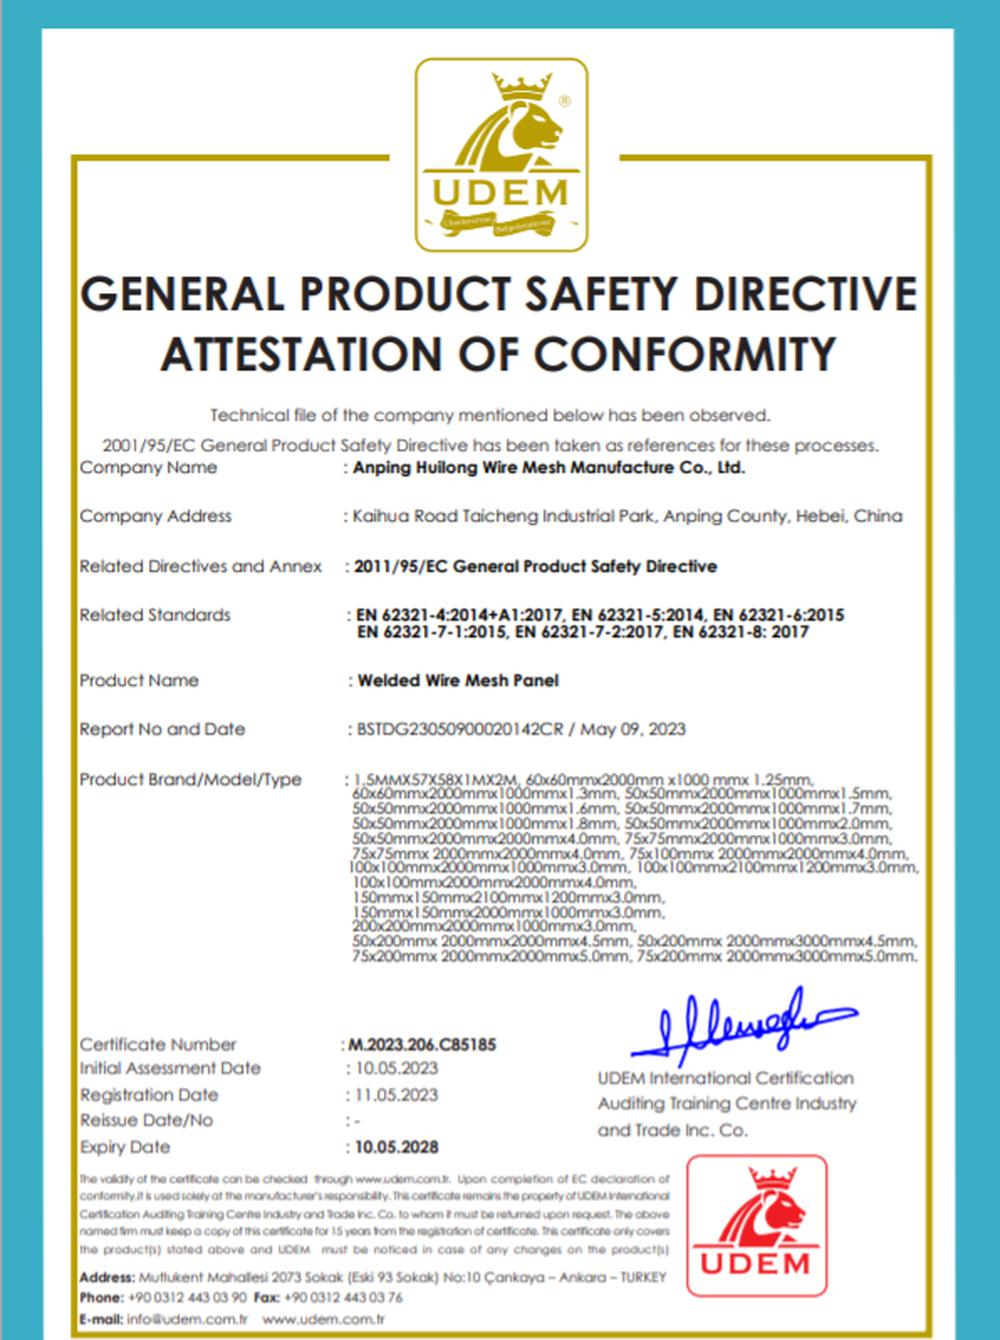 GENERAL PRODUCT SAFETY DIRECTIVE ATTESTATION OF CONFORMITY